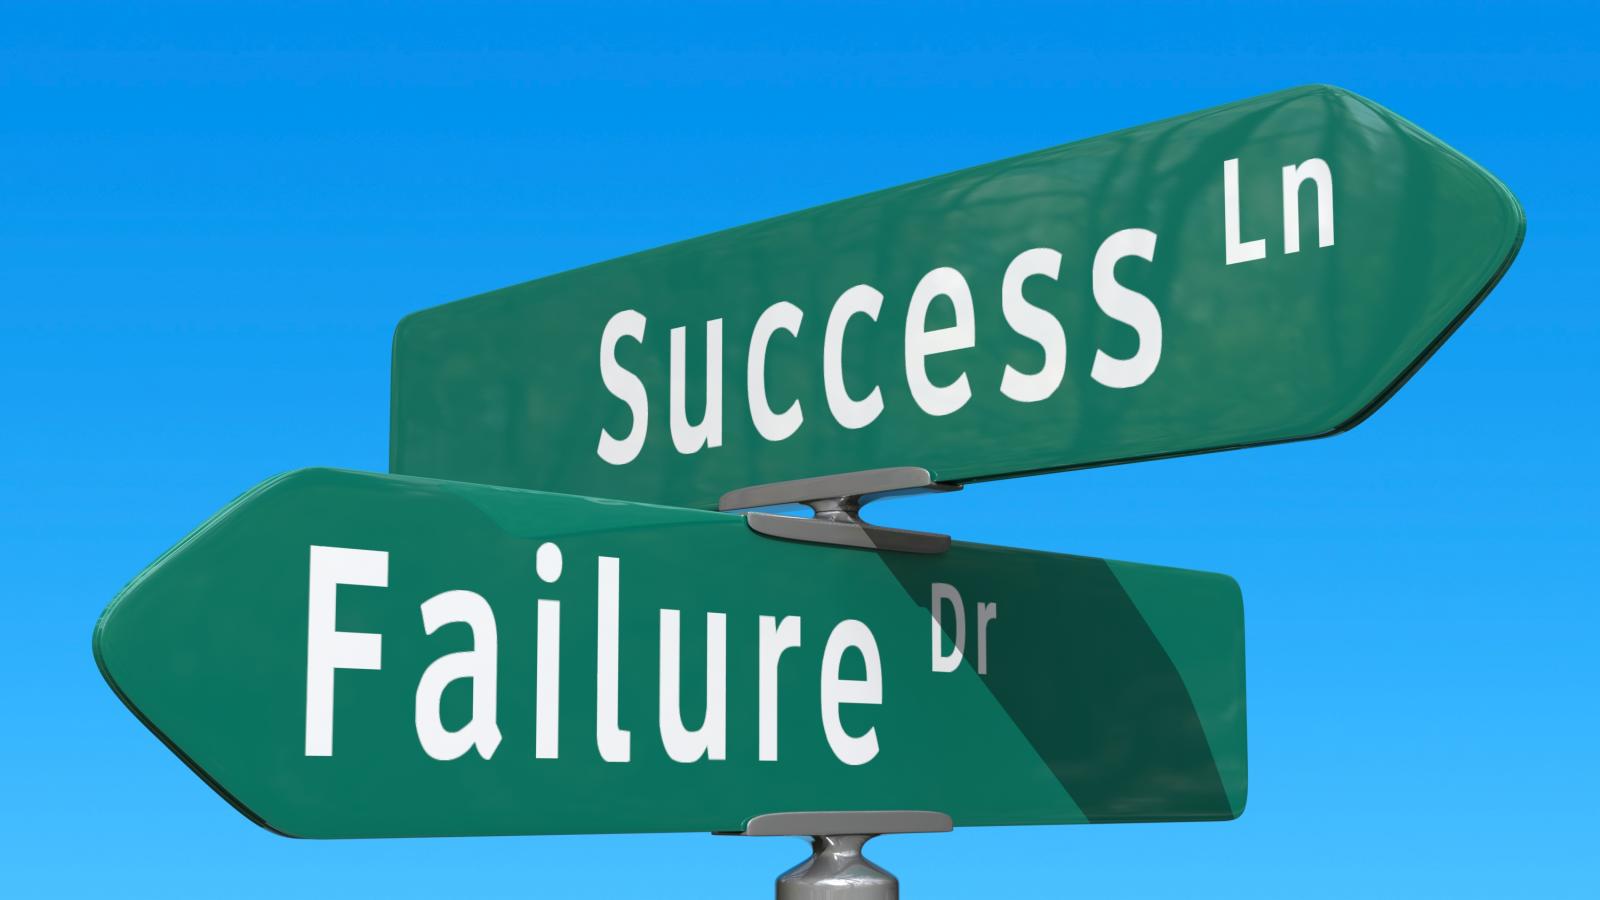 Cross-signs pointing in different directions with one direction saying "success lane" and the other direction "failure drive."